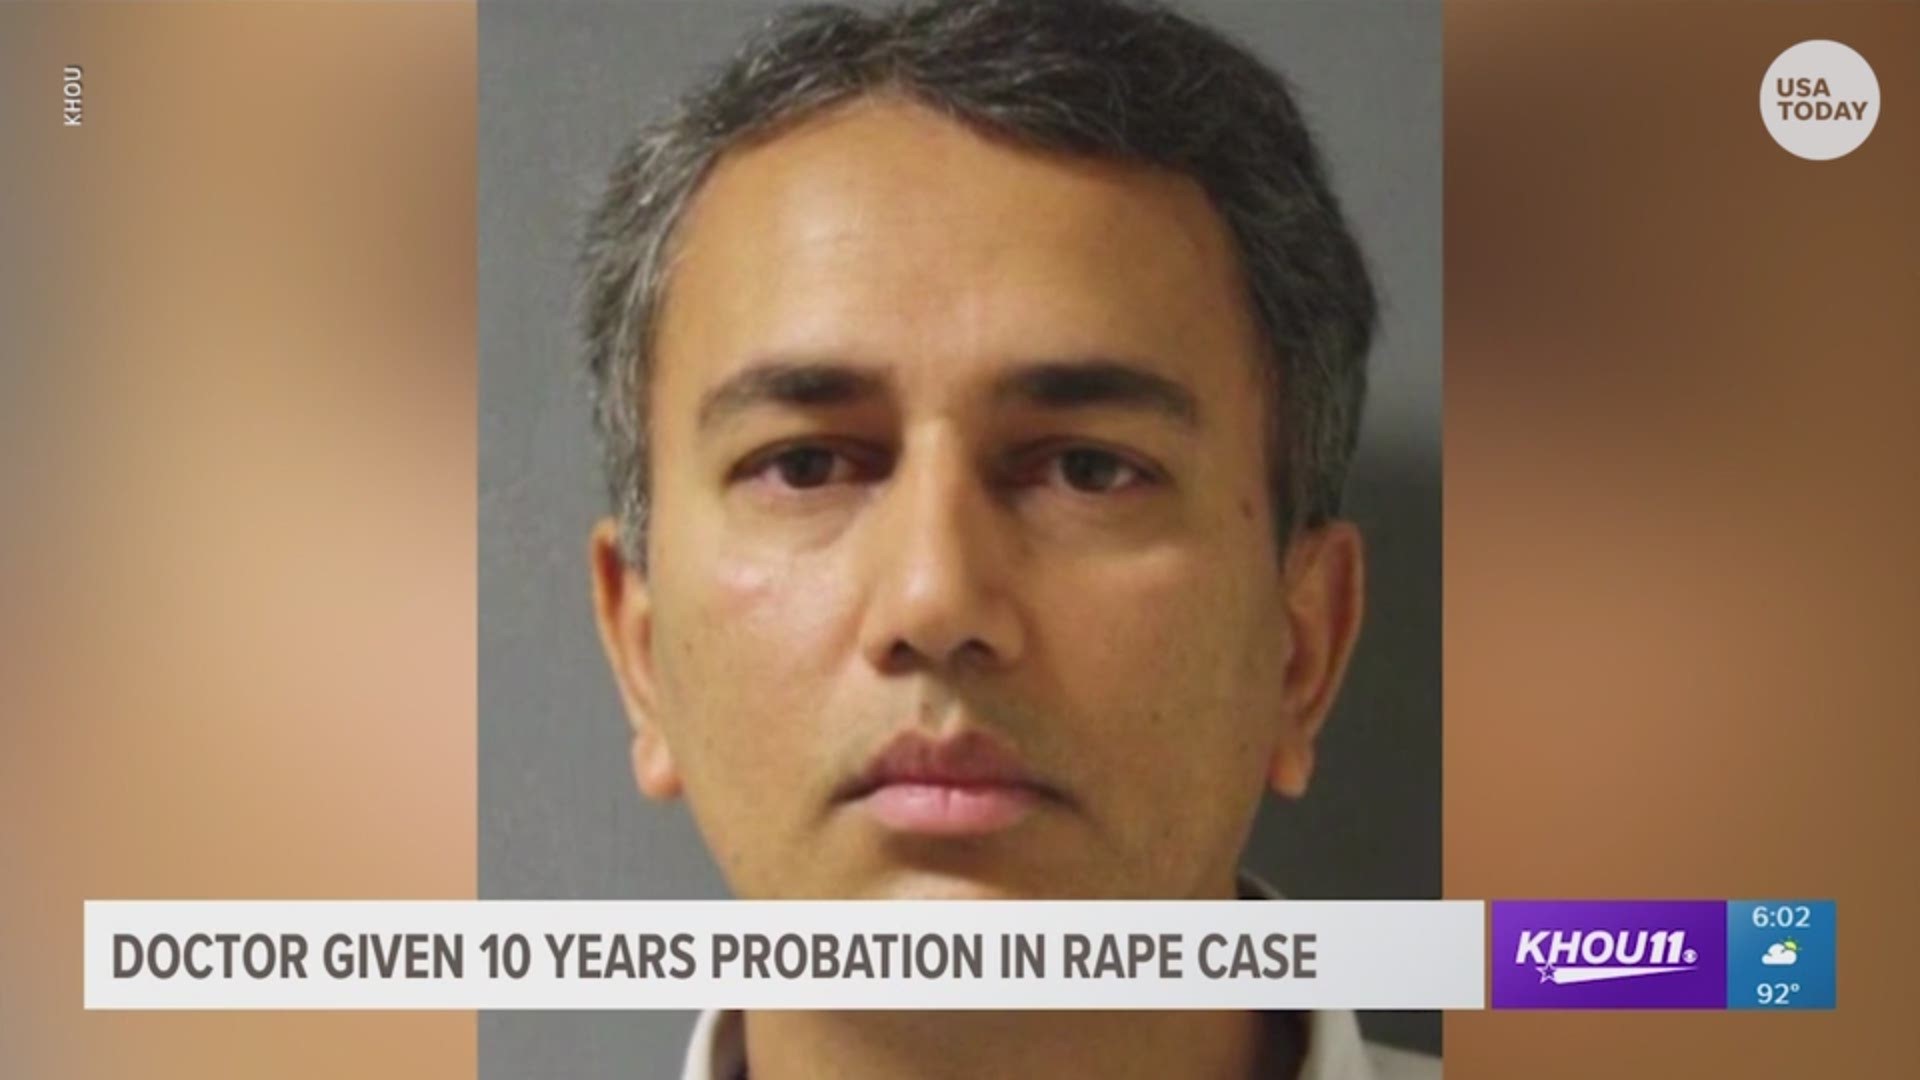 Former Doctor Who Raped Heavily Sedated Patient Will Serve No Prison